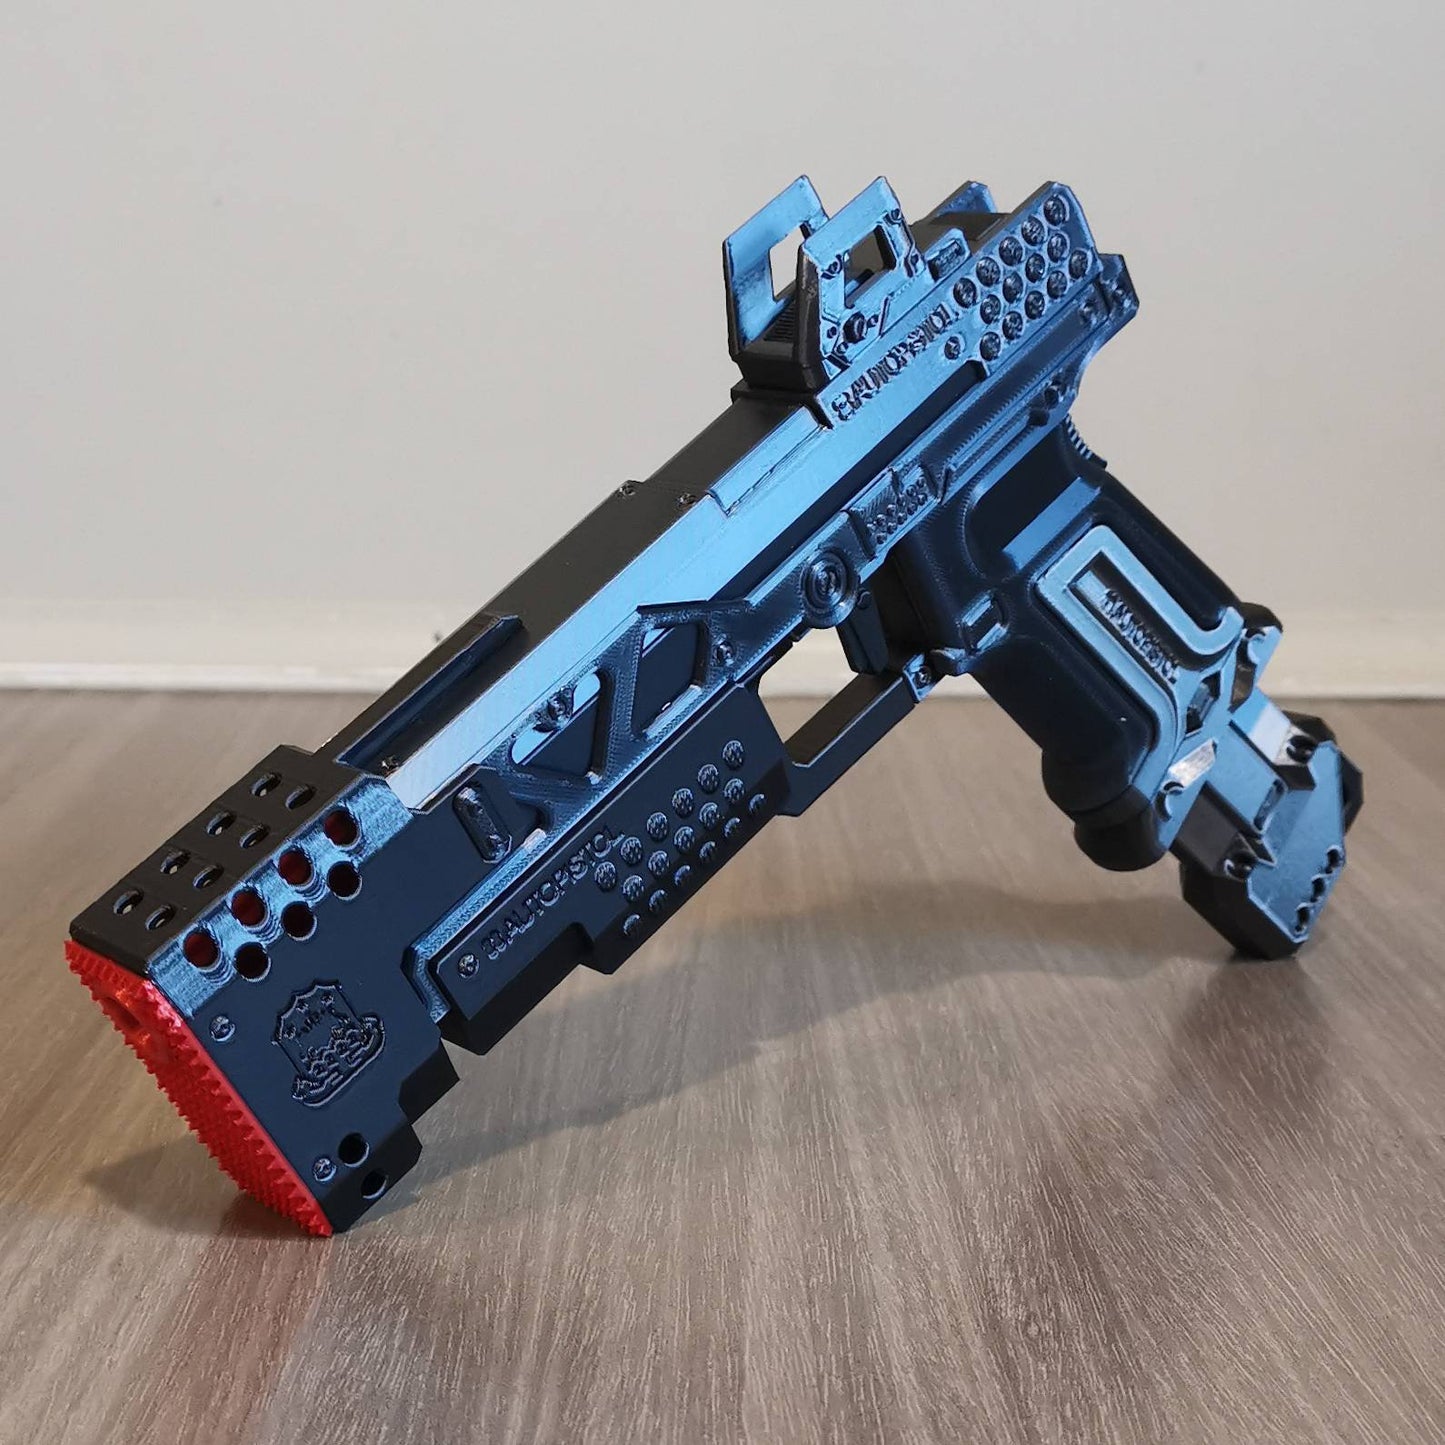 Apex Legends RE-45 Cosplay Replica With Stand, Wingman Replica, Post Apocalyptic Larp Weapon, Cyberpunk Cosplay Prop Weapon